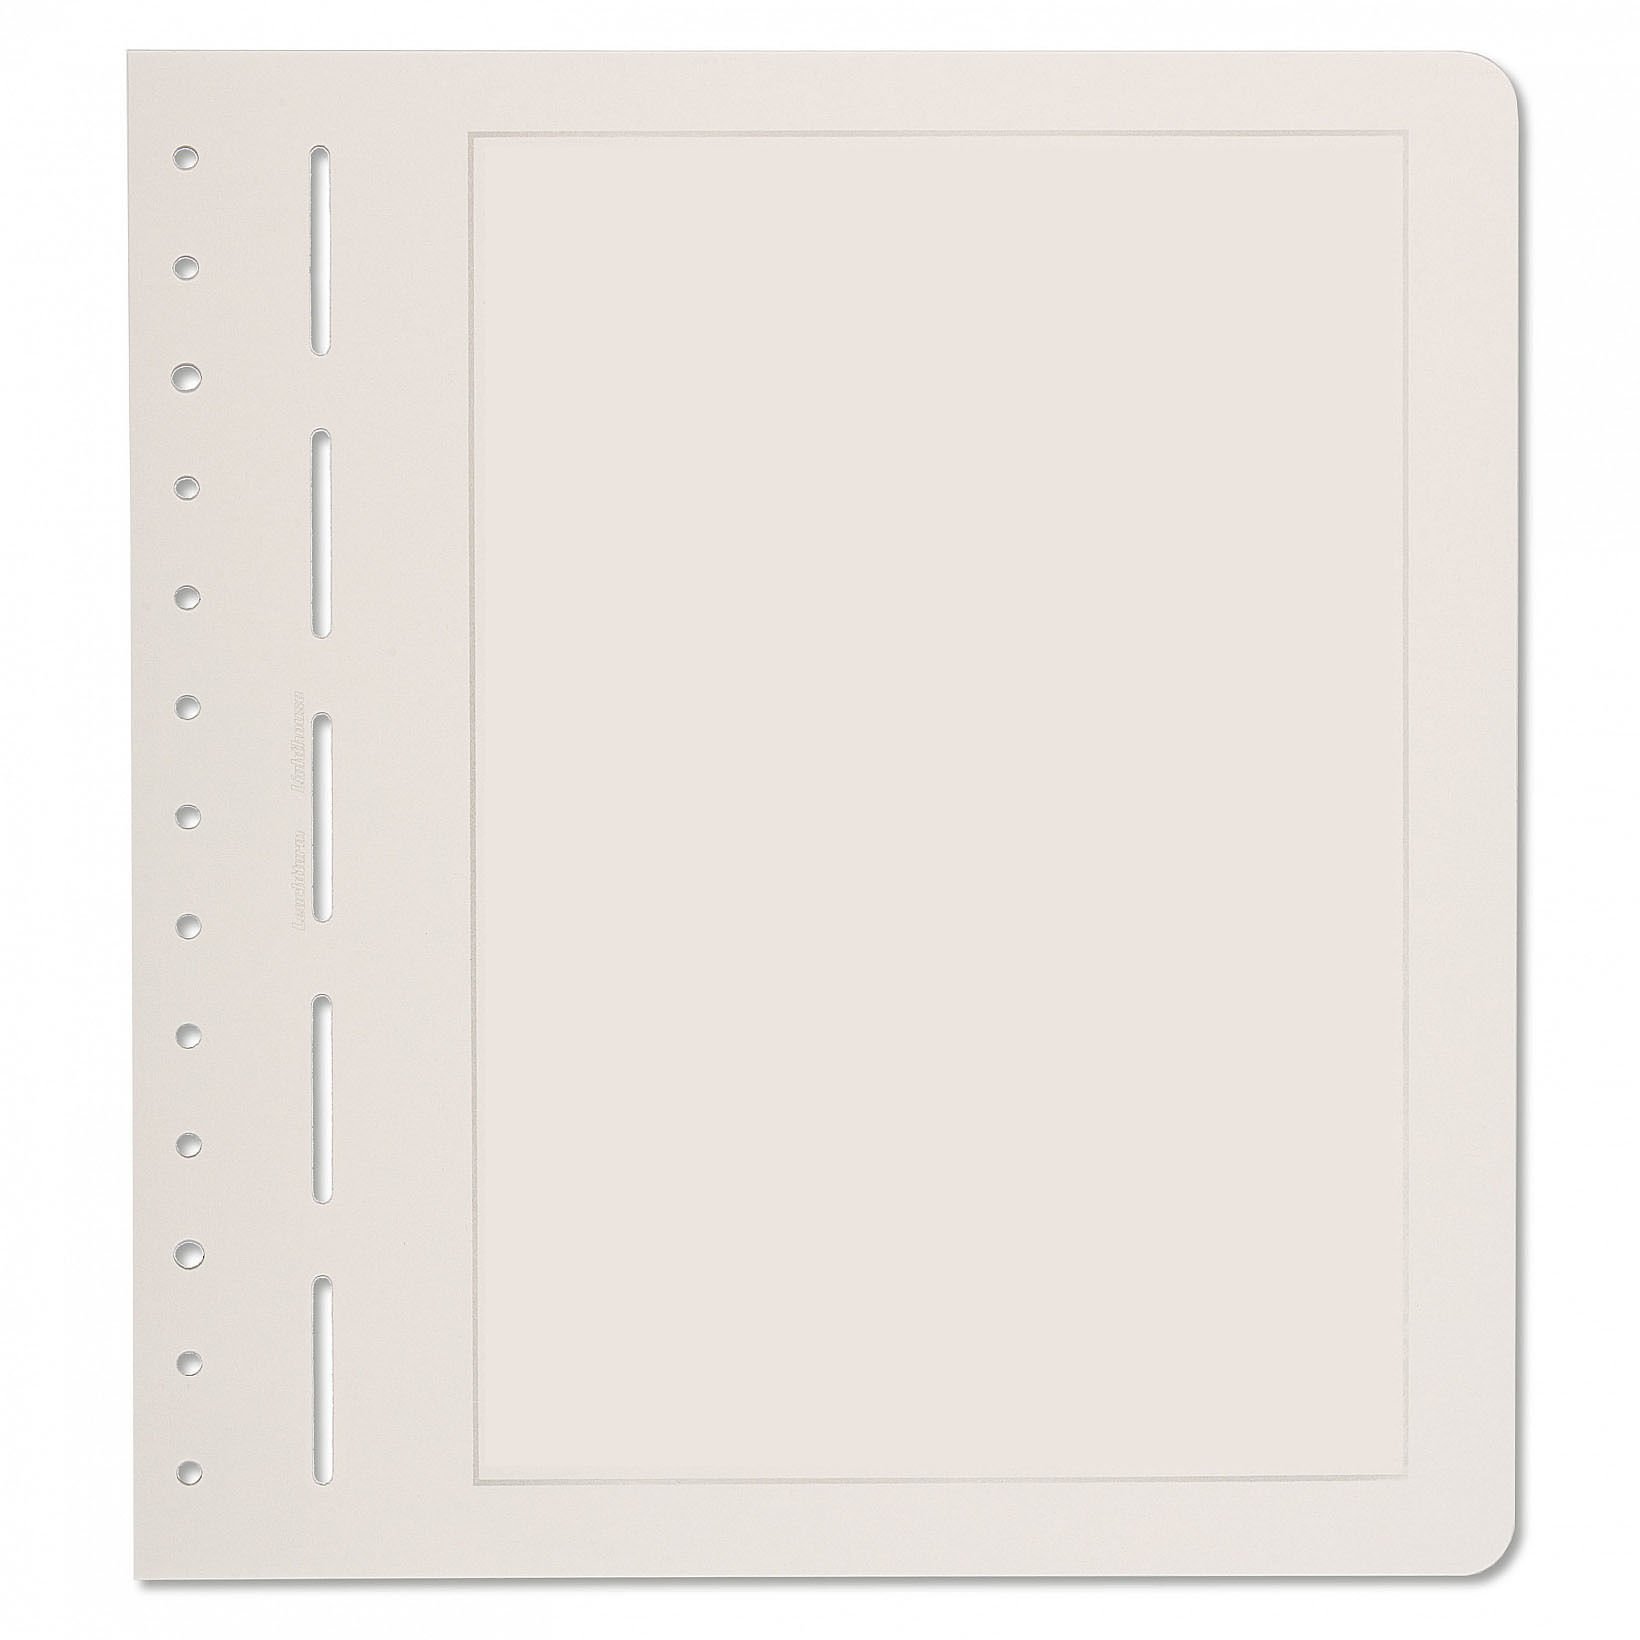 Blank Album Pages for Lighthouse stamp albums - Pages and Sheets for ...